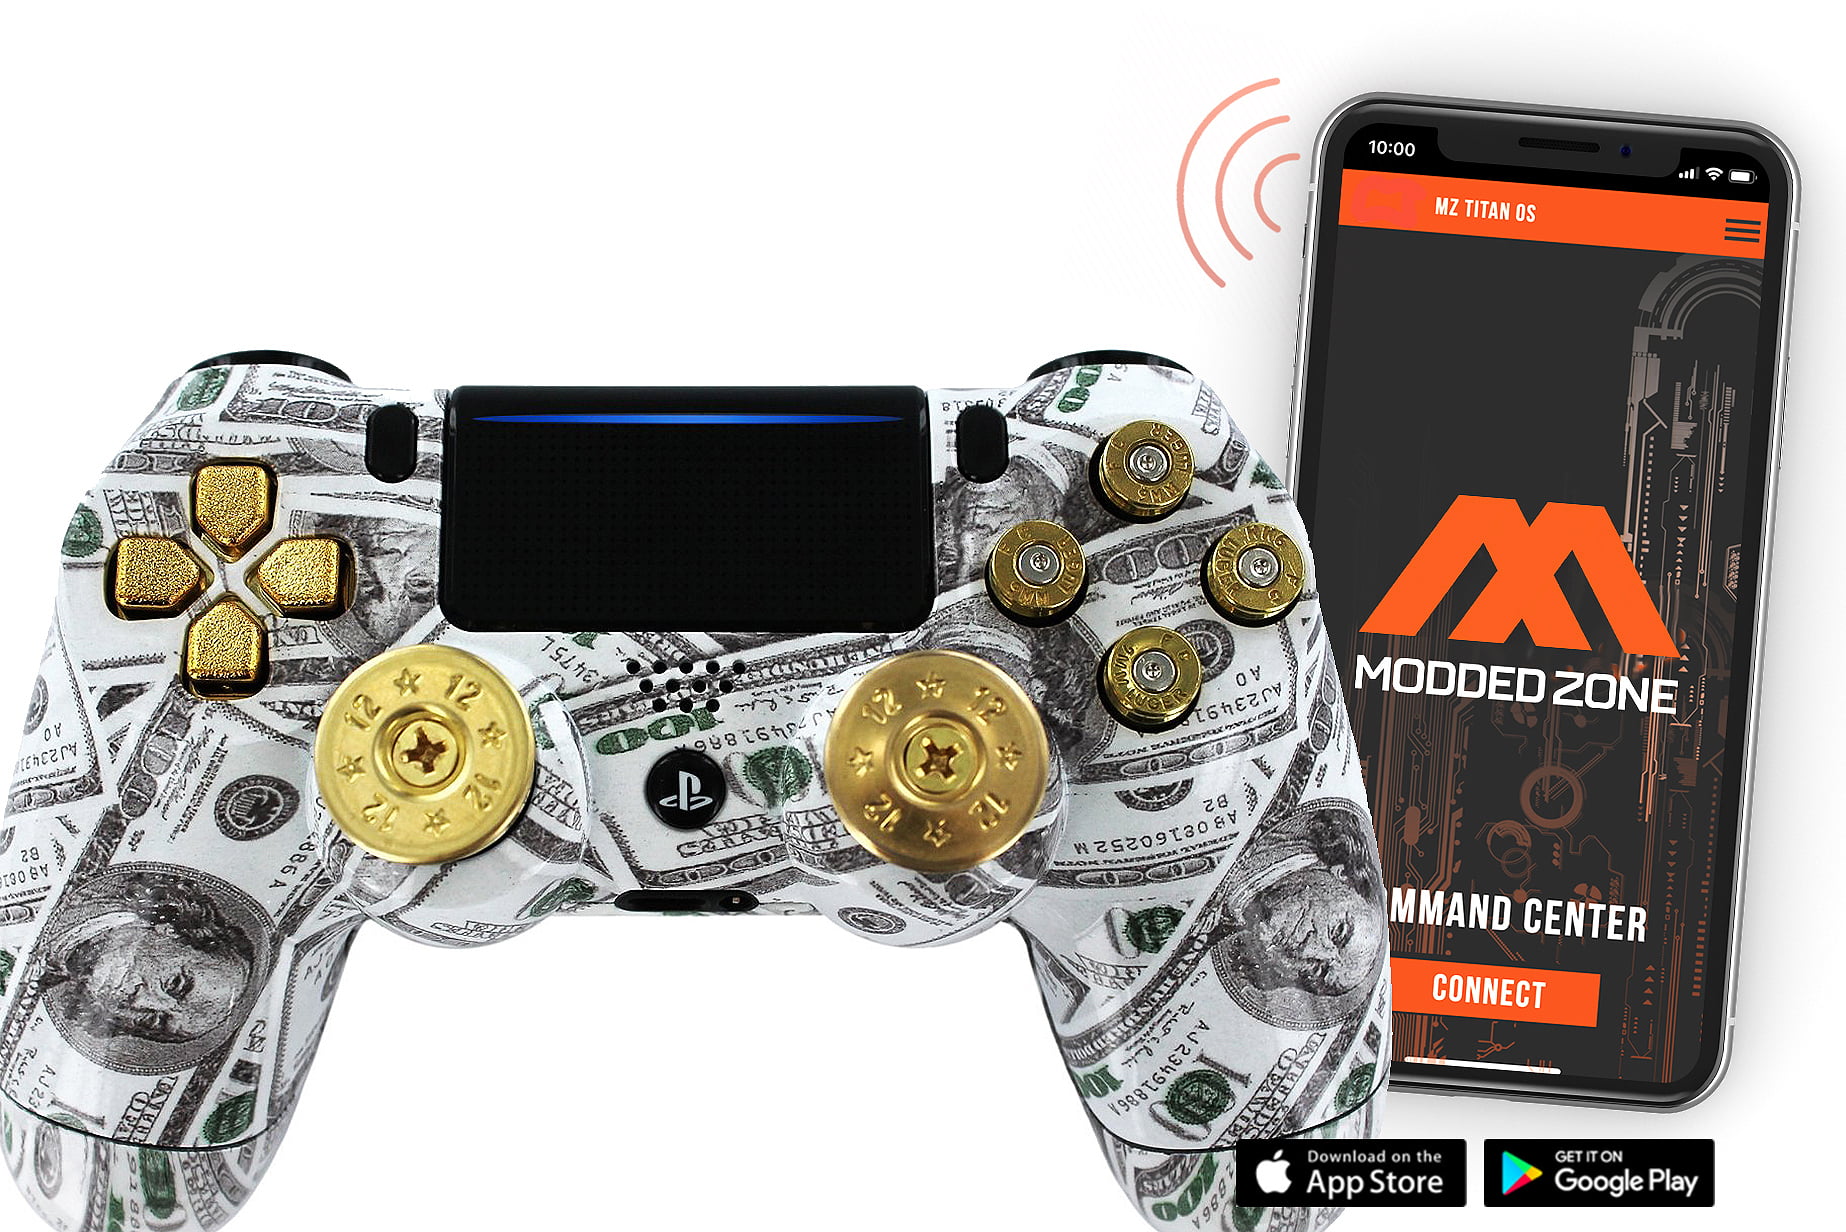 Money Talks W Shotgun Thumbsticks And Real Gold 9 Mm Bullet Buttons Ps4 Pro Smart Rapid Fire Modded Controller Mods For Fps All Major Shooter Games Warzone More Cuh Zct2u Walmart Com